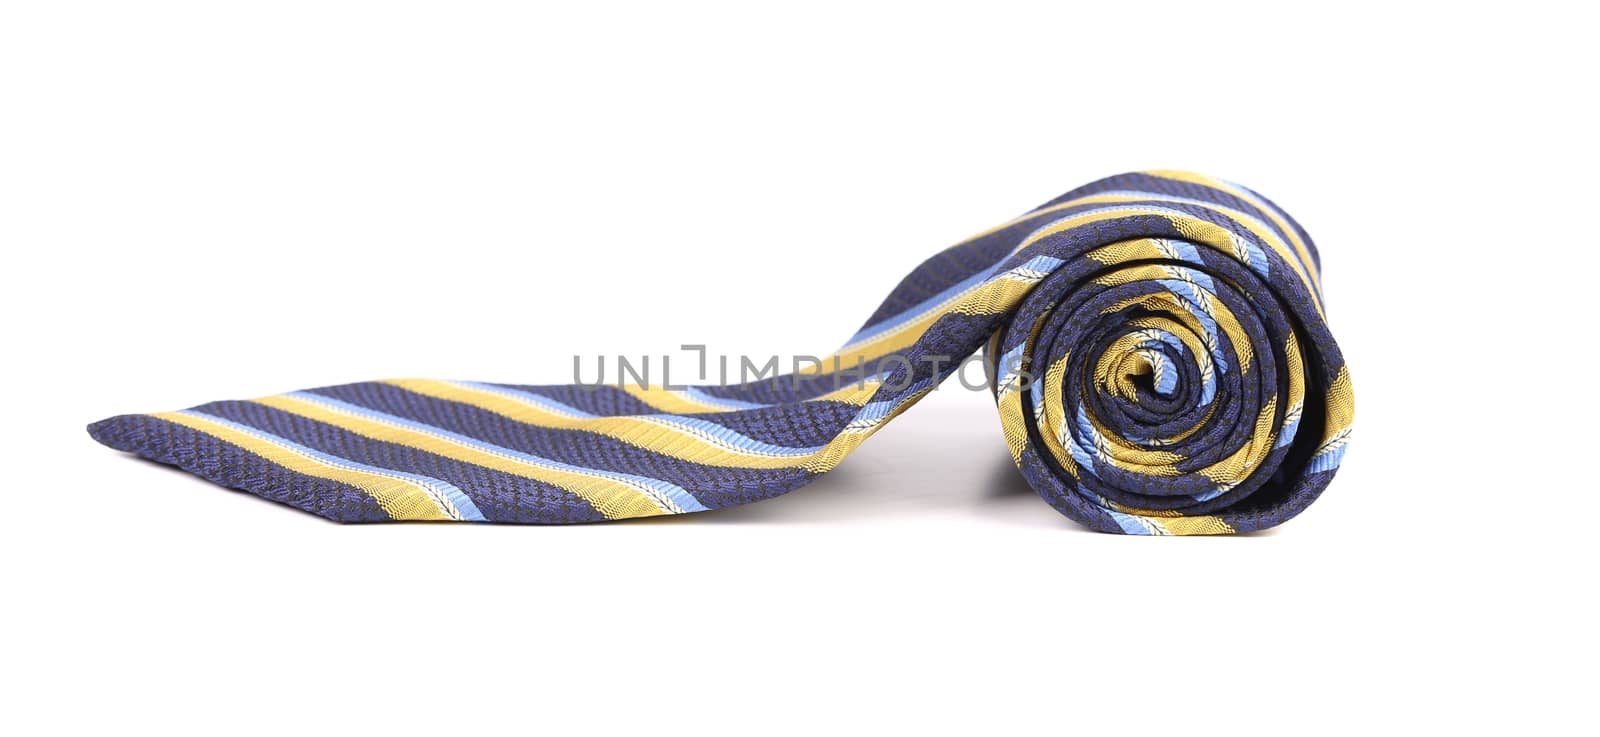 Rolled up stripy necktie.  Isolated on a white background